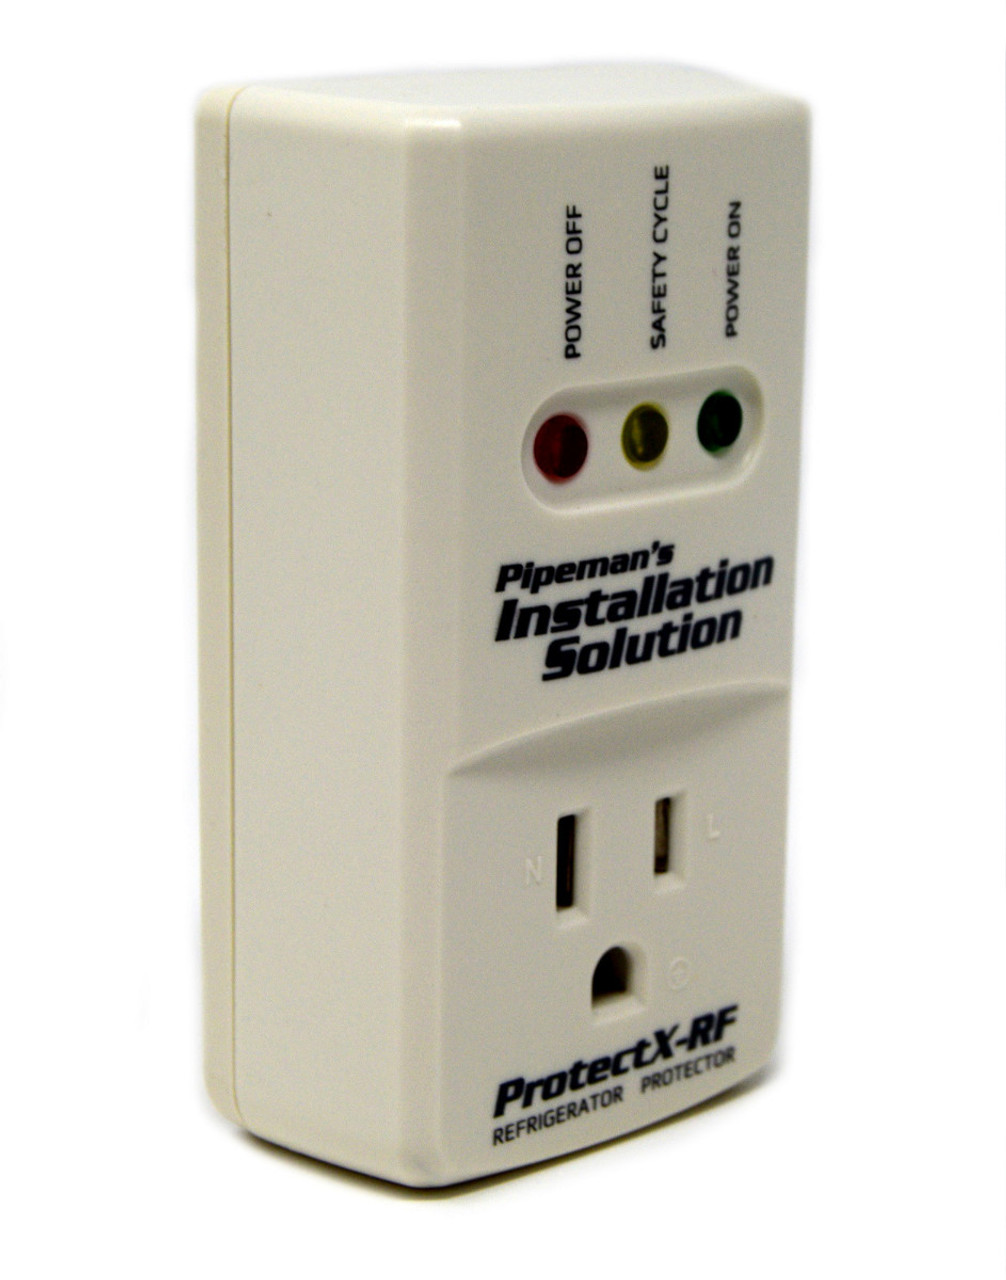 1800 Watts Refrigerator Voltage Protector Brownout Surge Appliance (New  Model) - Best Connections